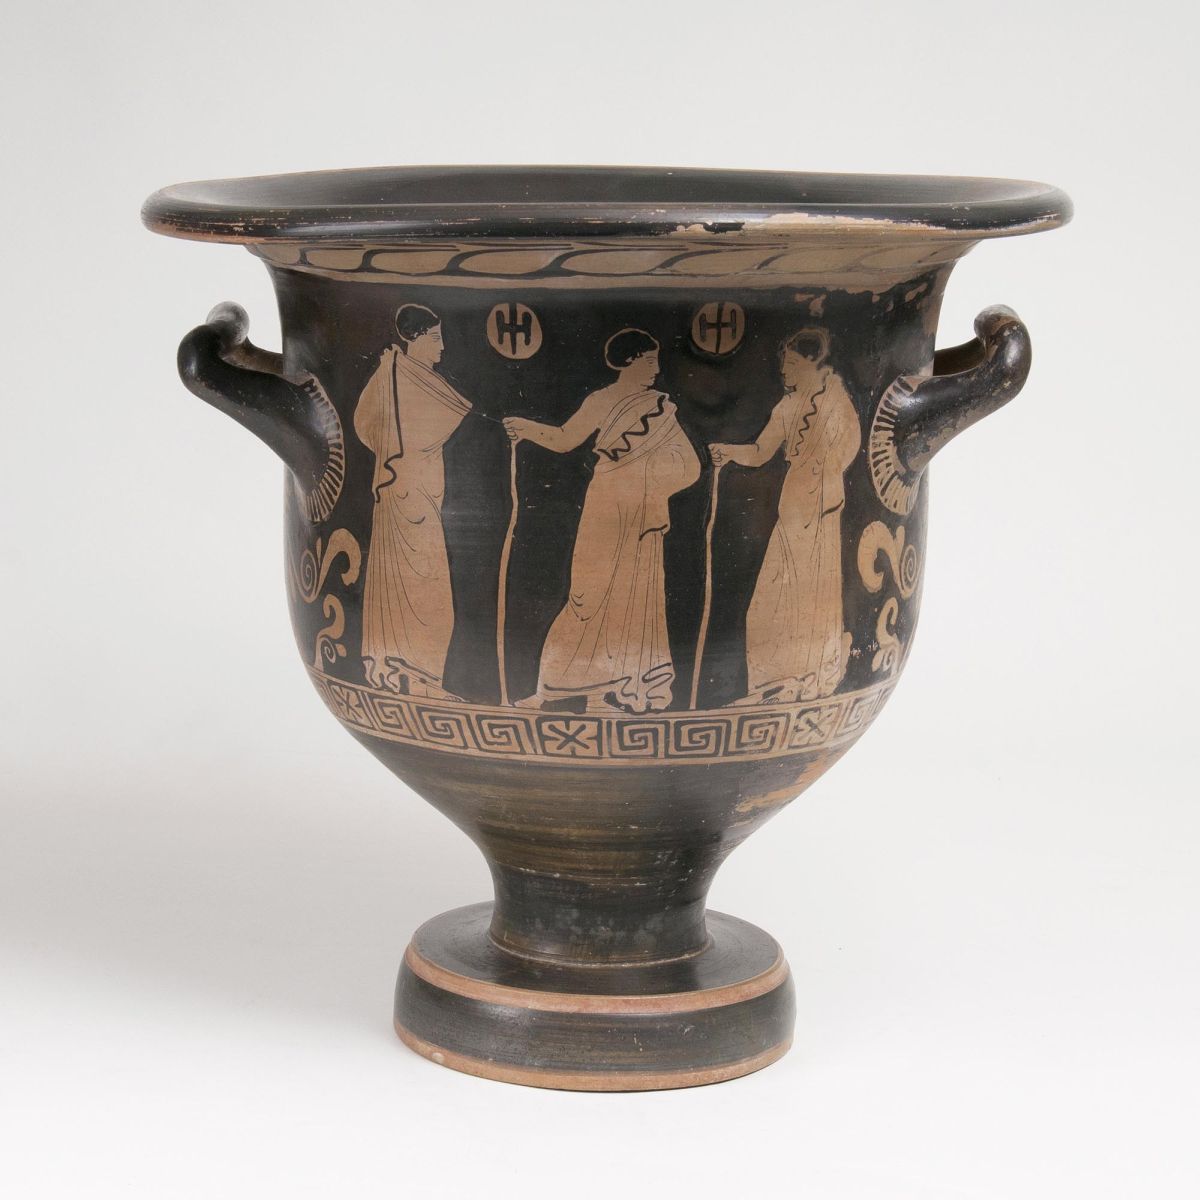 A large Apulian Red-Figured Bell Krater - image 2